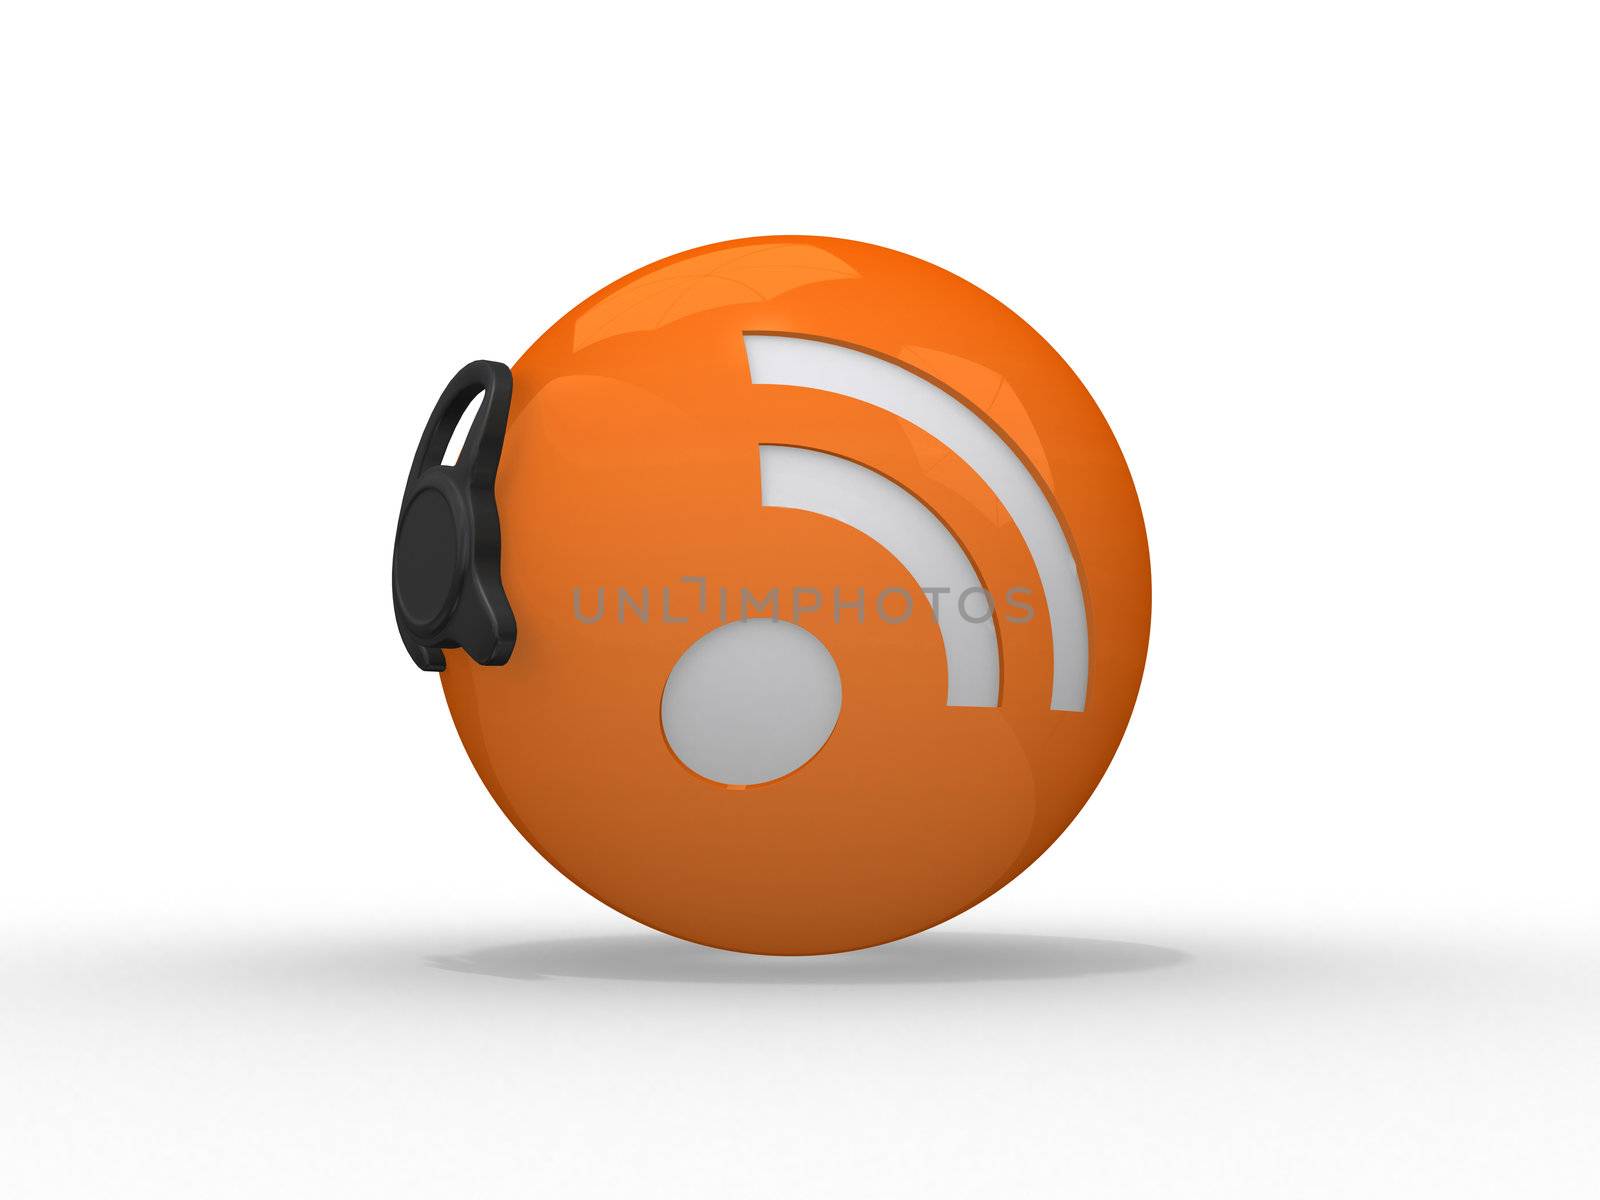 3d illustration of rss symbol with headset, orange sphere over white background